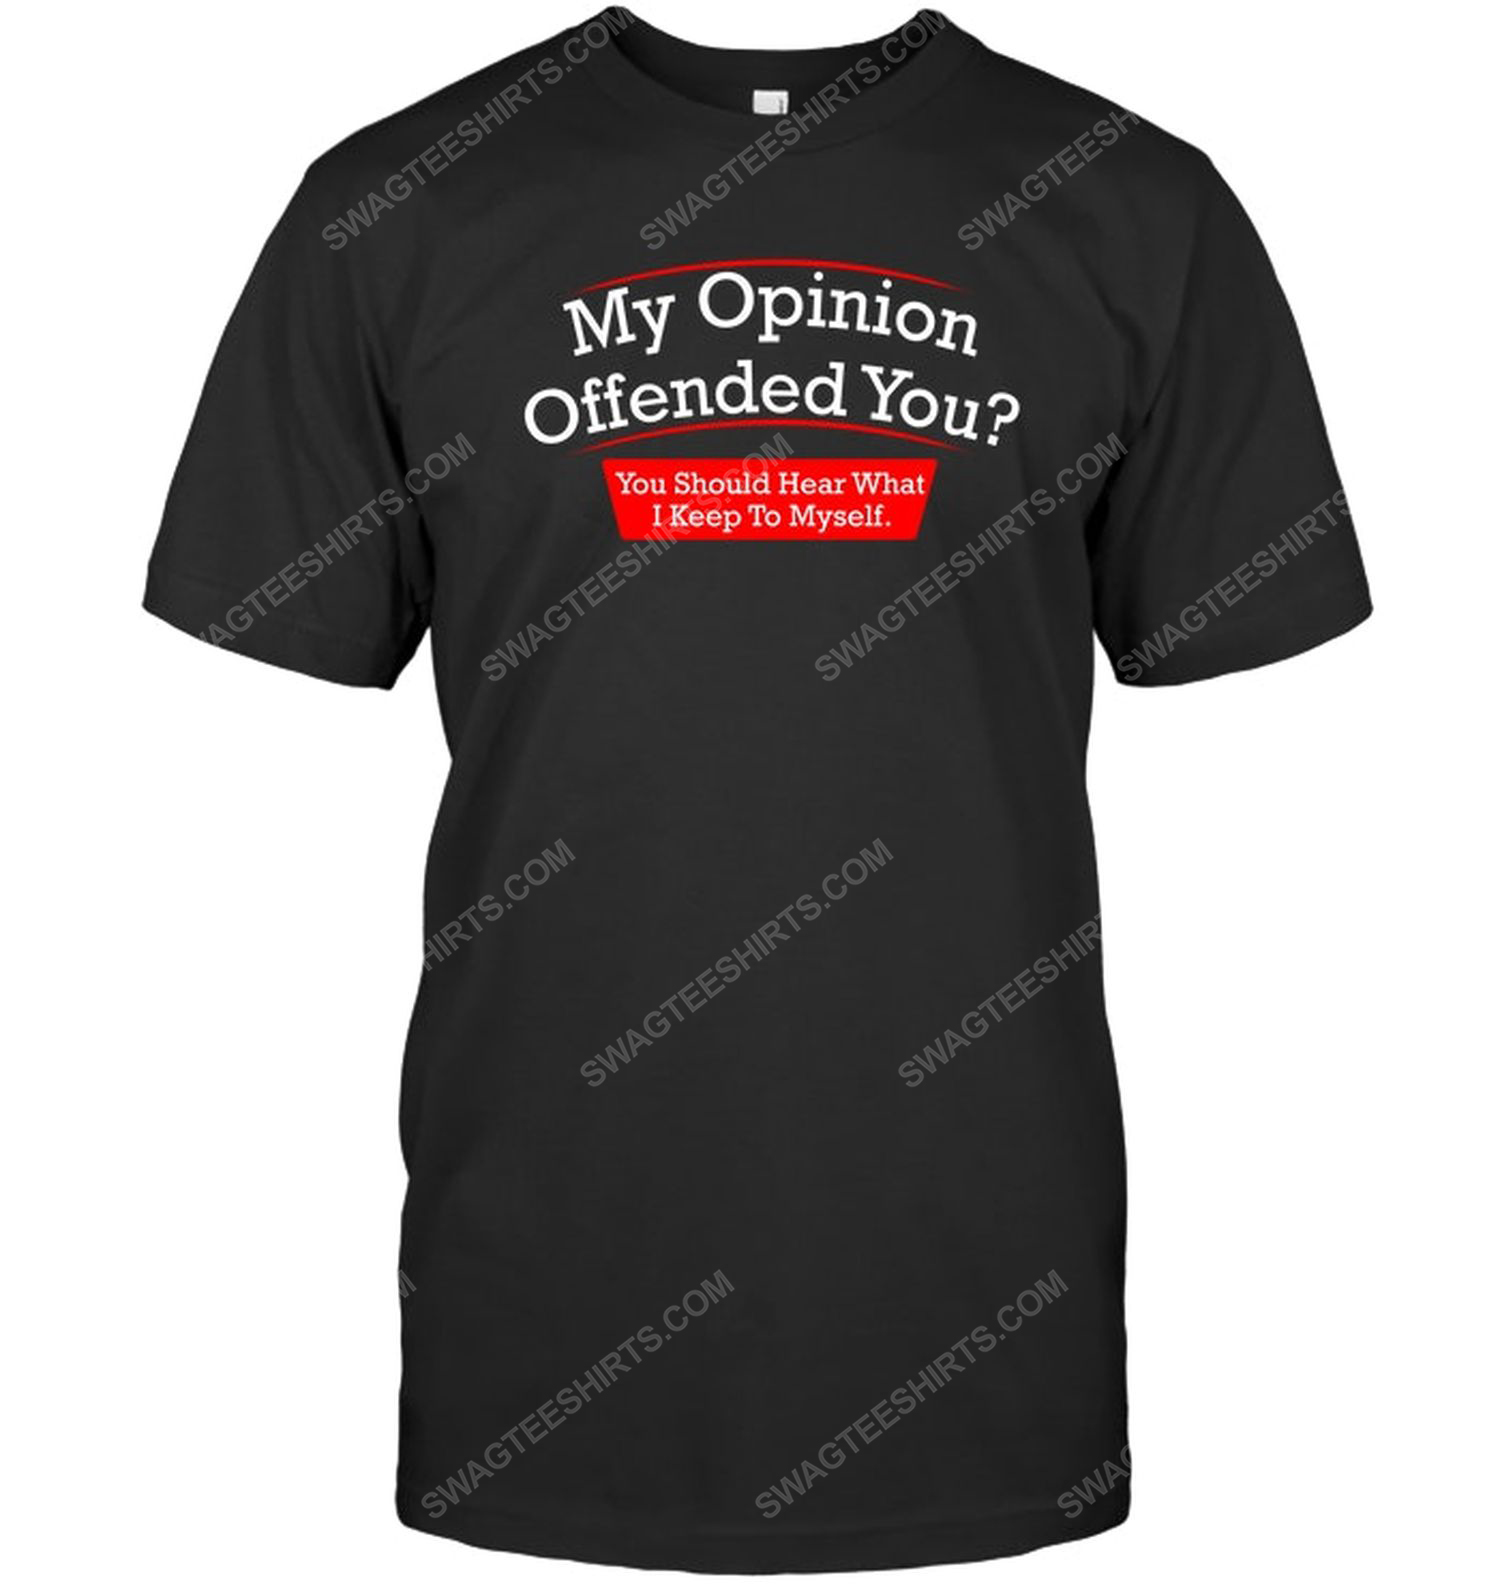 My opinion offended you you should hear what i keep to myself political tshirt